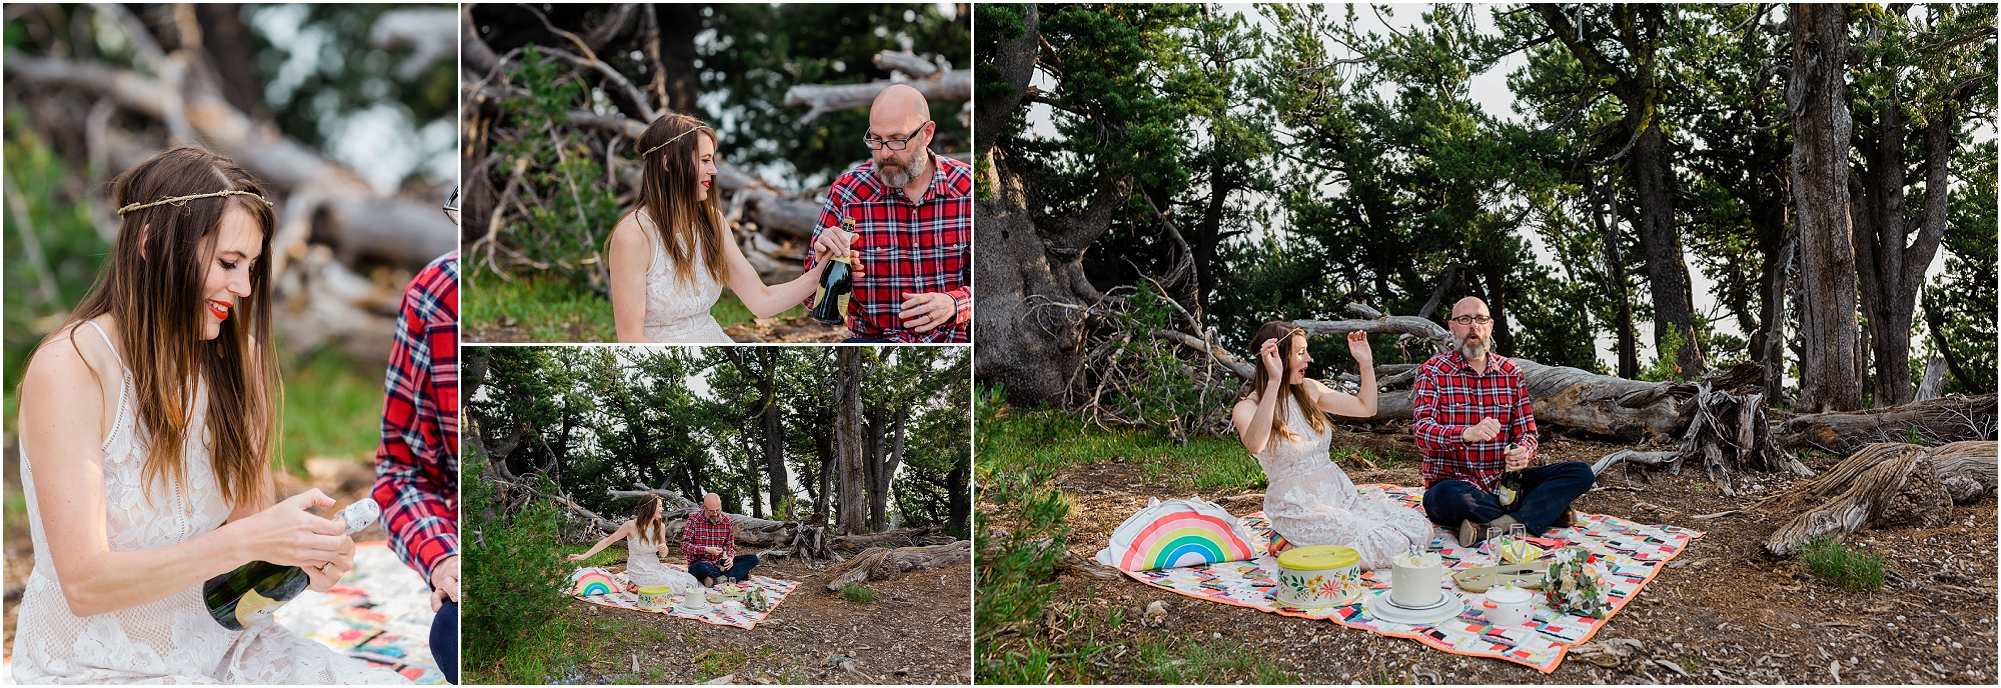 An eclectic Indie bride and groom pop the champagne to celebrate their Crater Lake elopement in Oregon on a beautiful summer day. | Erica Swantek Photography